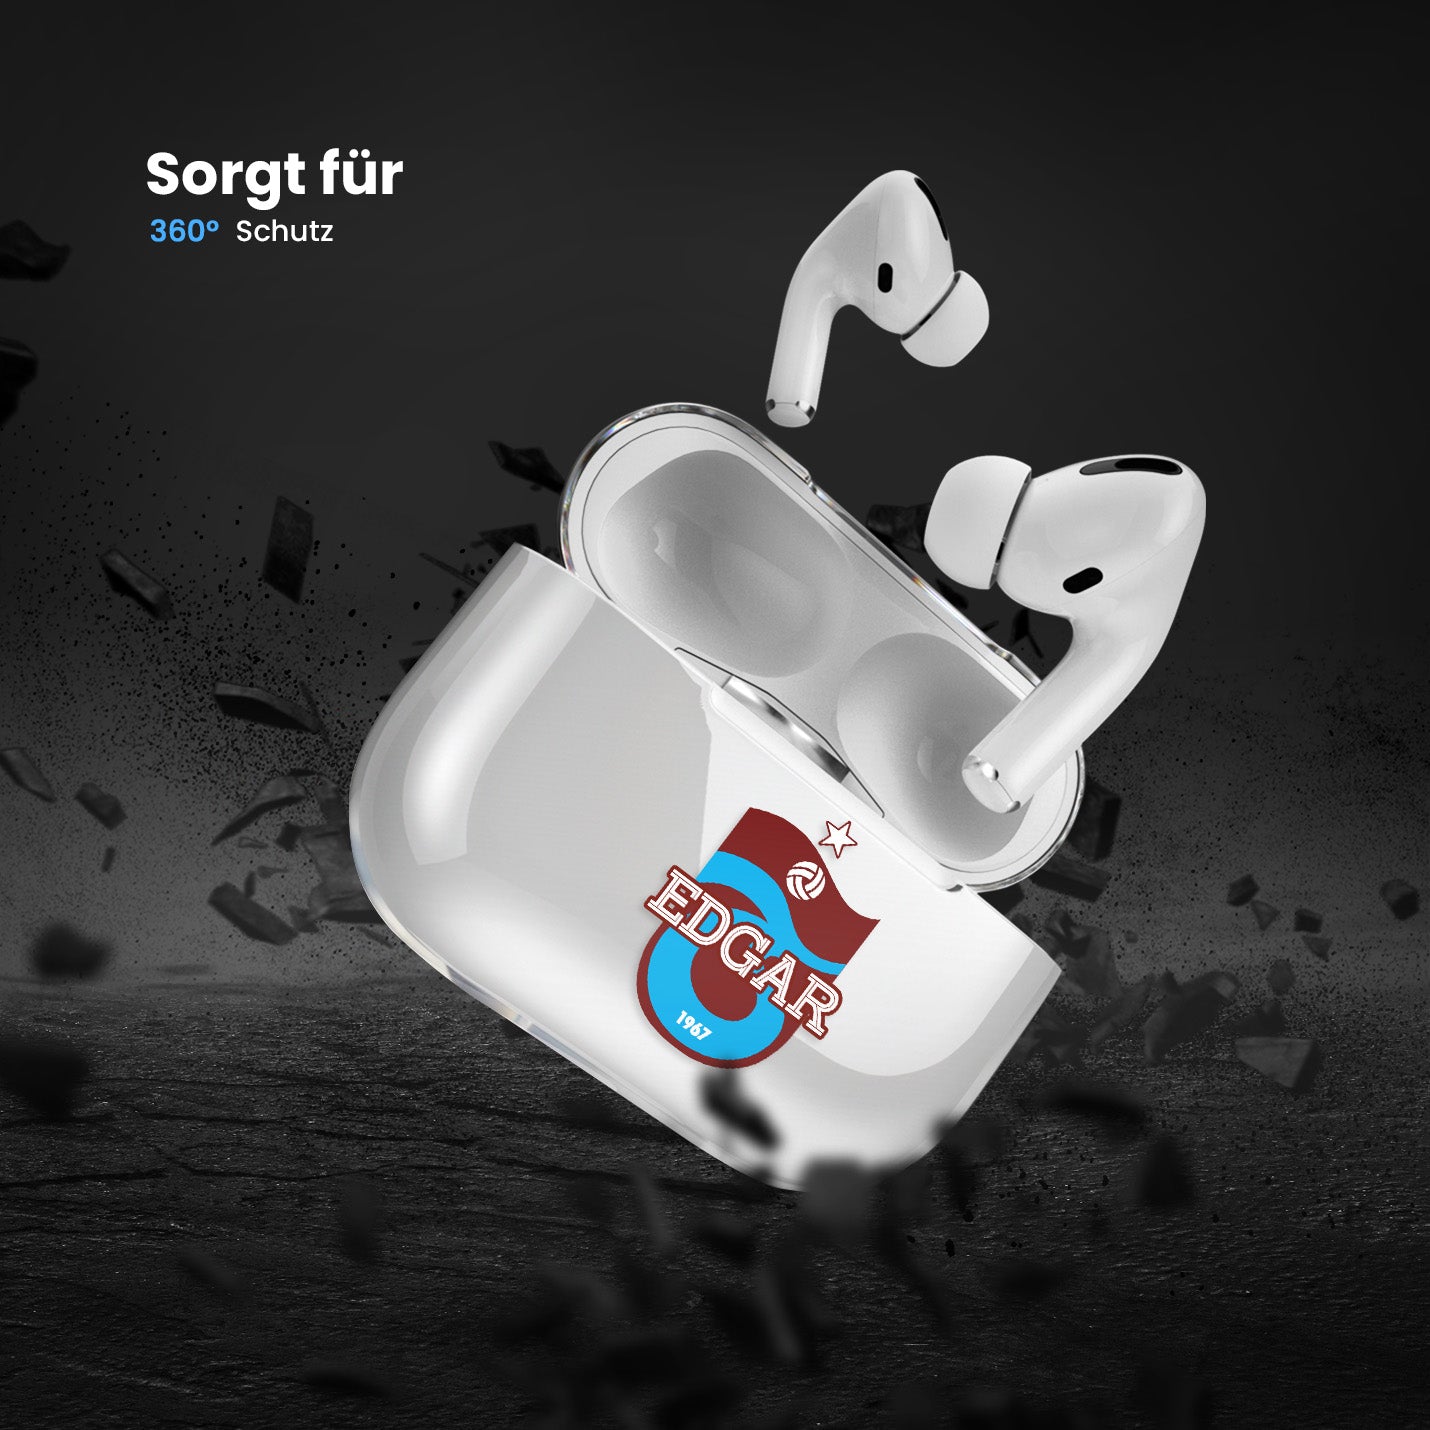 Airpods Hülle - Trabzonspor